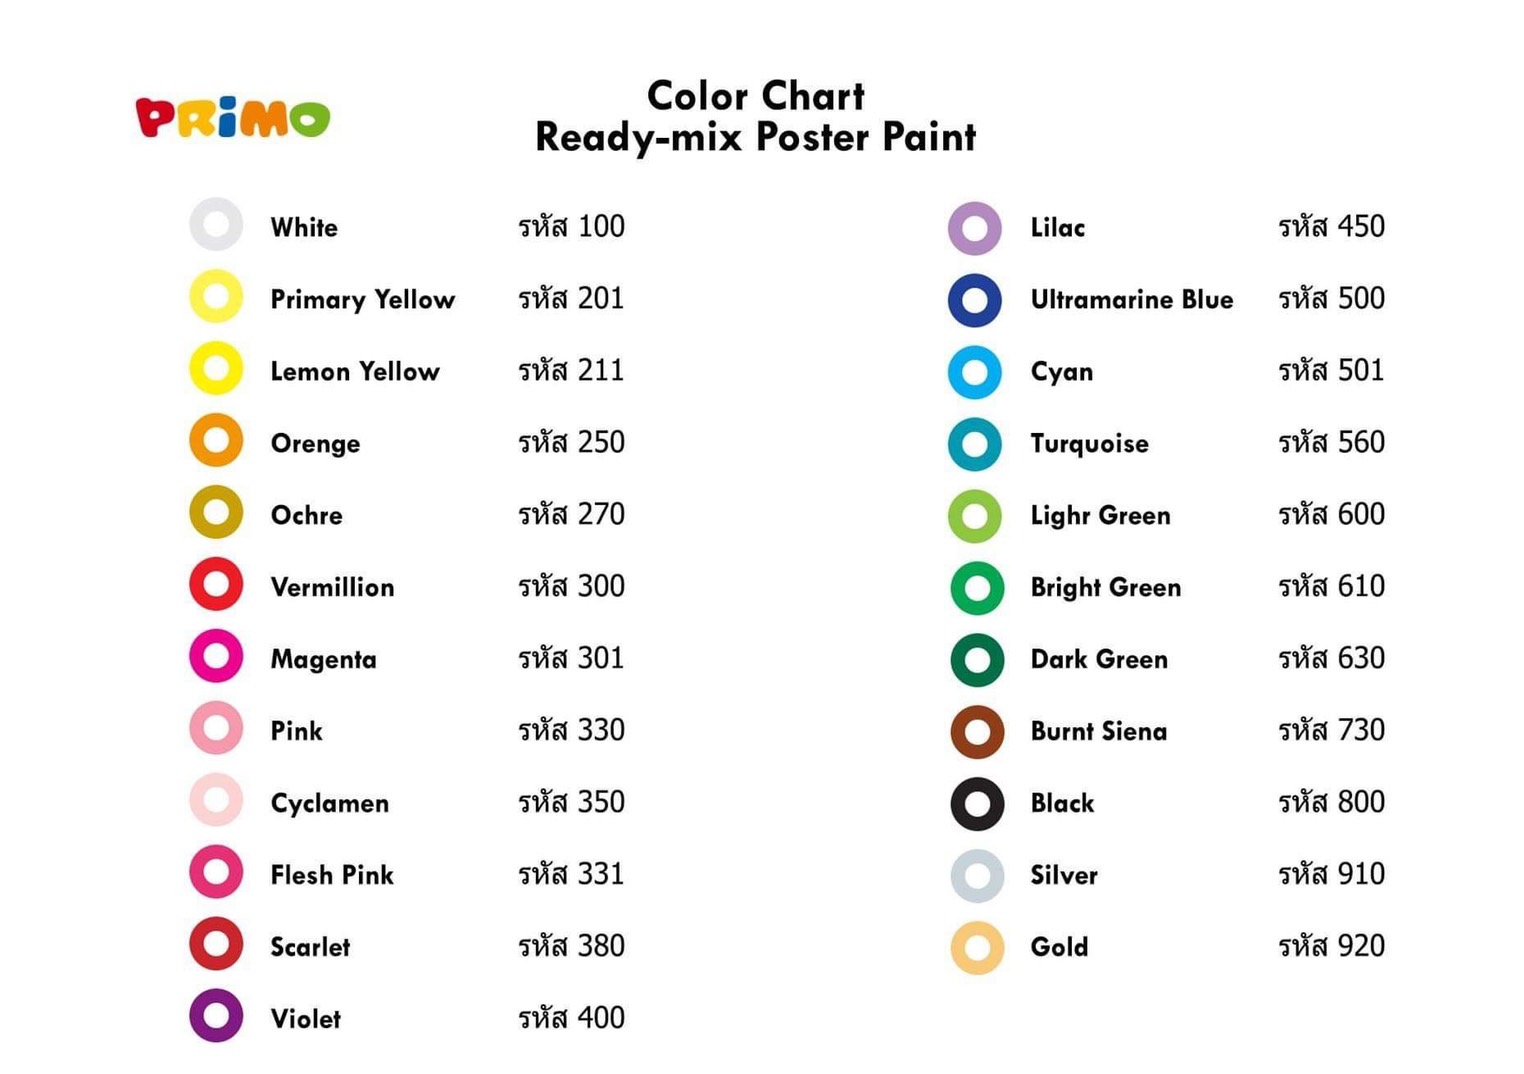 Primo Ready-mix Color Chart